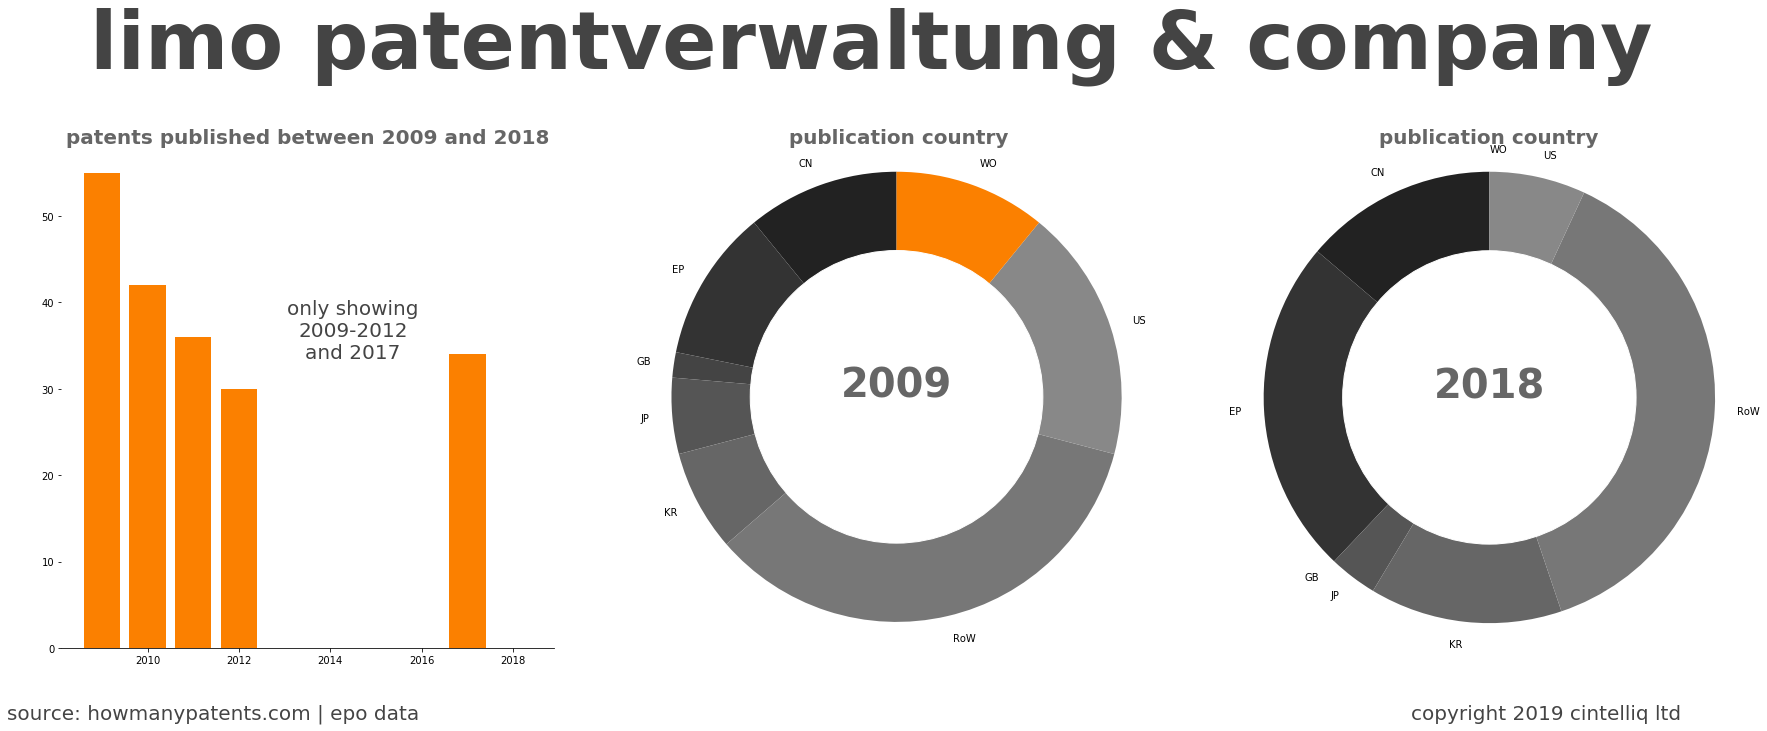 summary of patents for Limo Patentverwaltung & Company